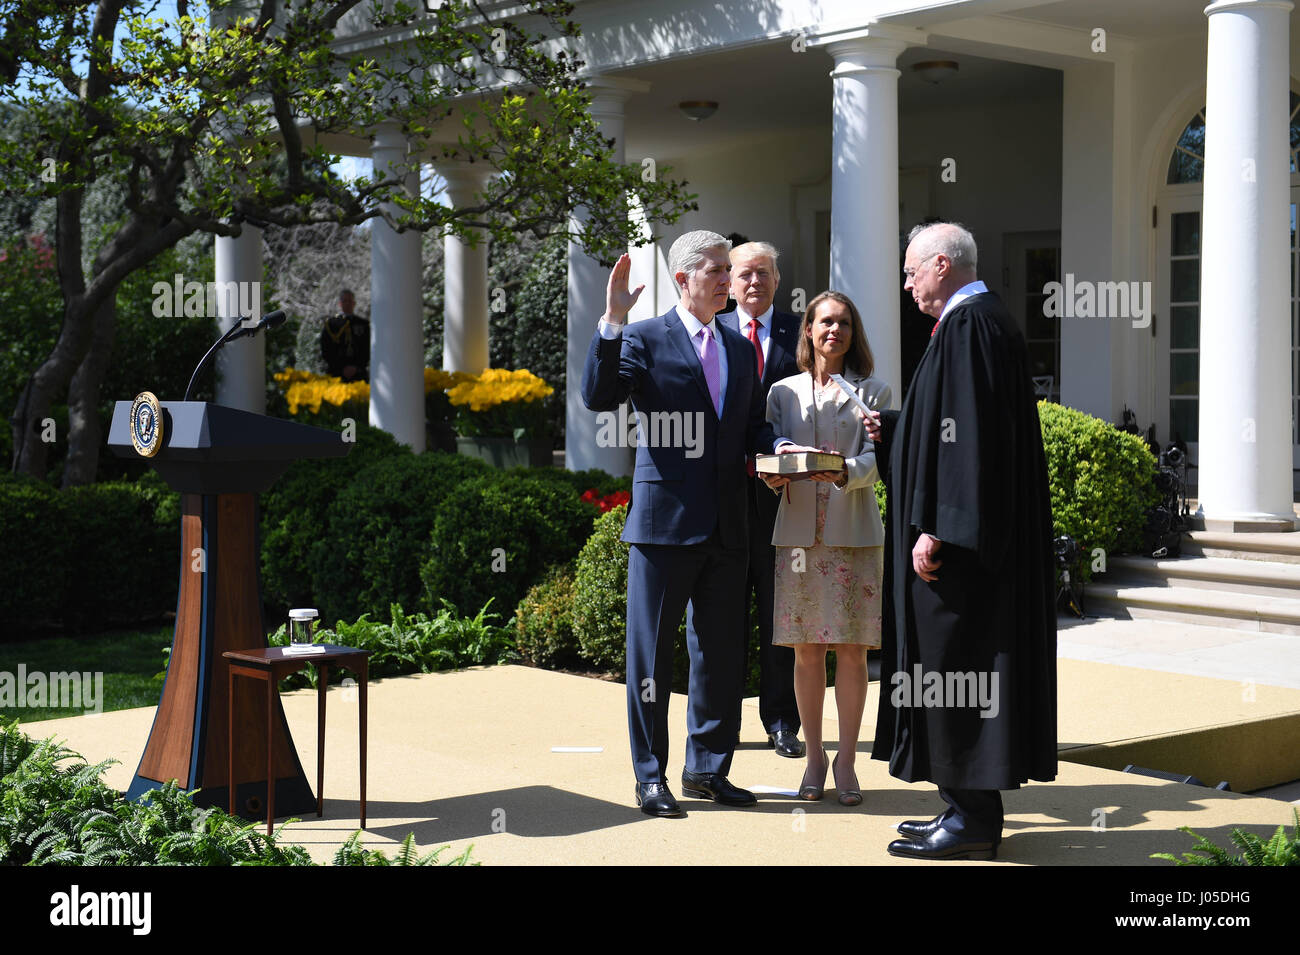 Washington, USA. 10th Apr, 2017. Neil Gorsuch (1st L) attends the swearing-in ceremony as the newest member of the U.S. Supreme Court at the White House in Washington, DC, the United States, on April 10, 2017. Neil Gorsuch on Monday was sworn in as the newest member of the U.S. Supreme Court, adding a conservative shade to the judicial body that will soon rule on a number of divisive issues including voting and gun rights. Credit: Yin Bogu/Xinhua/Alamy Live News Stock Photo